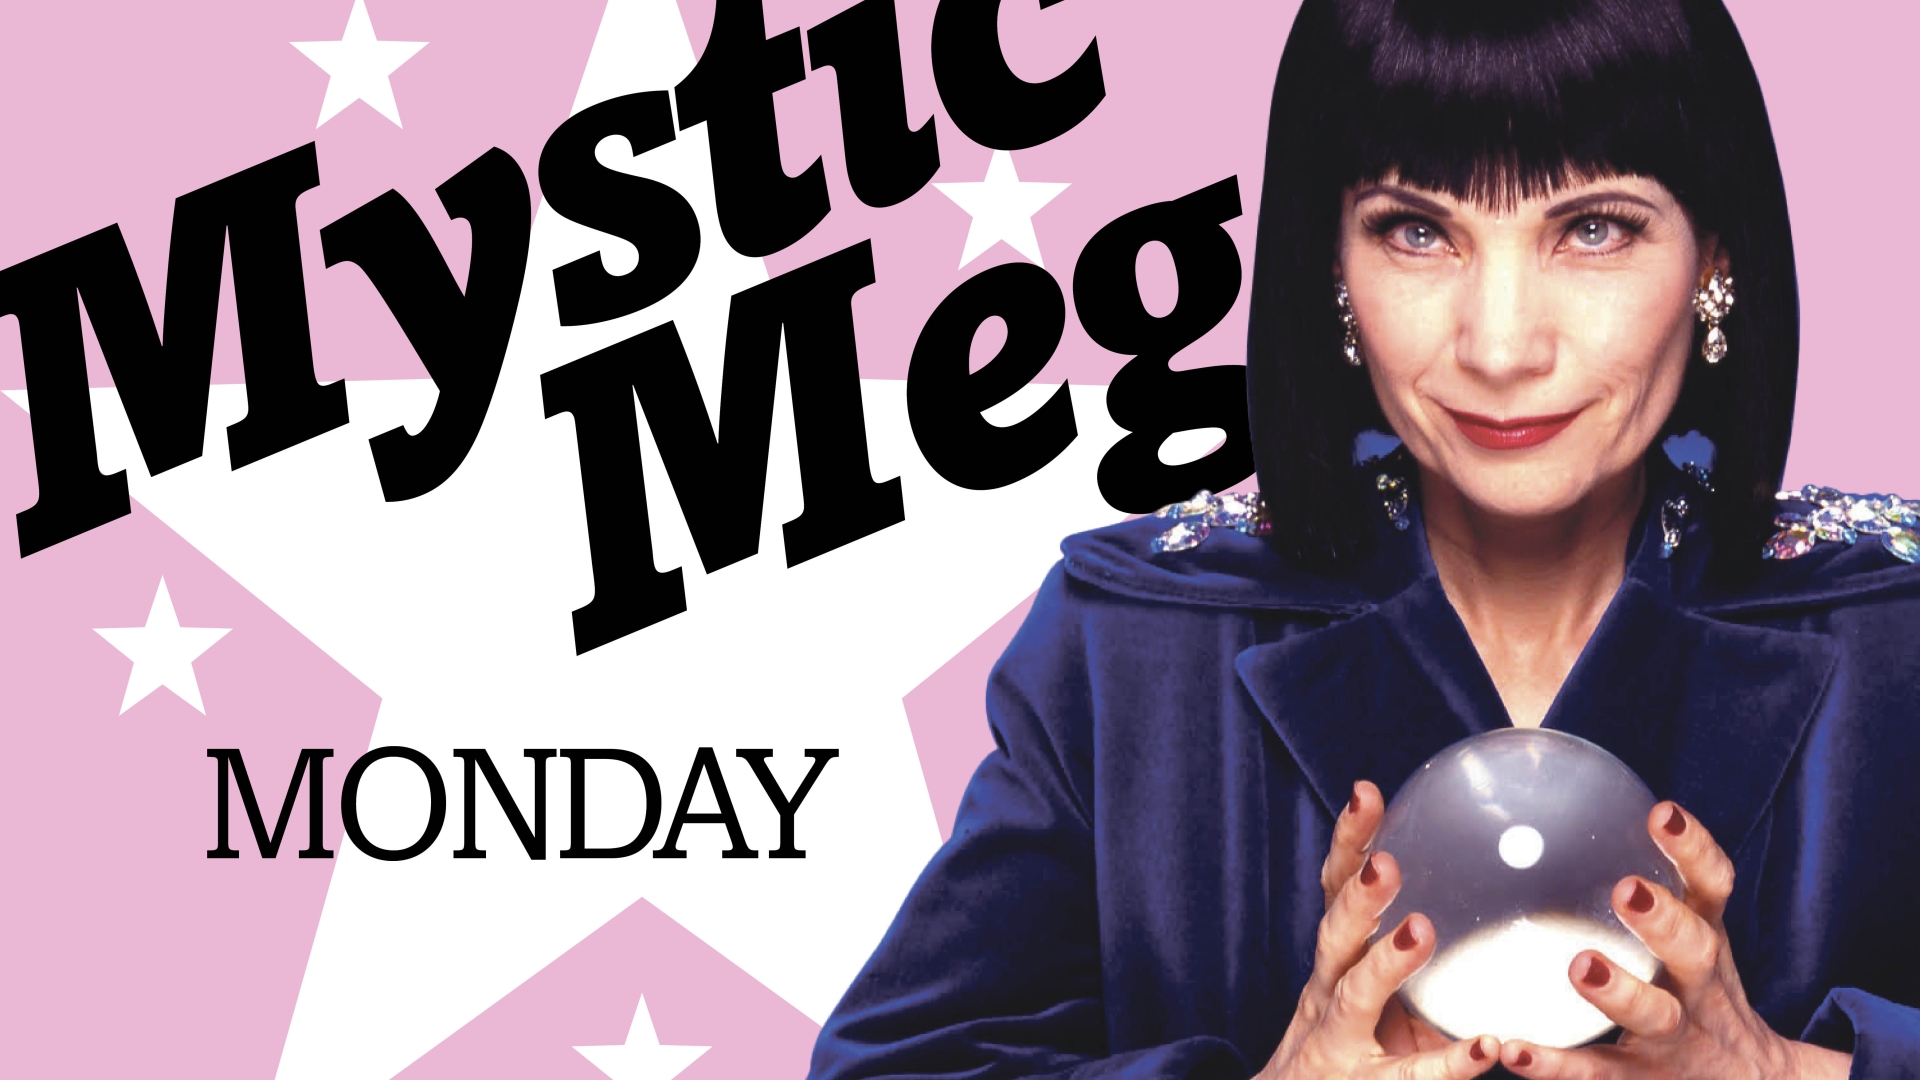 Today’s Horoscope: Daily star sign guide for Mystic Meg, October 31